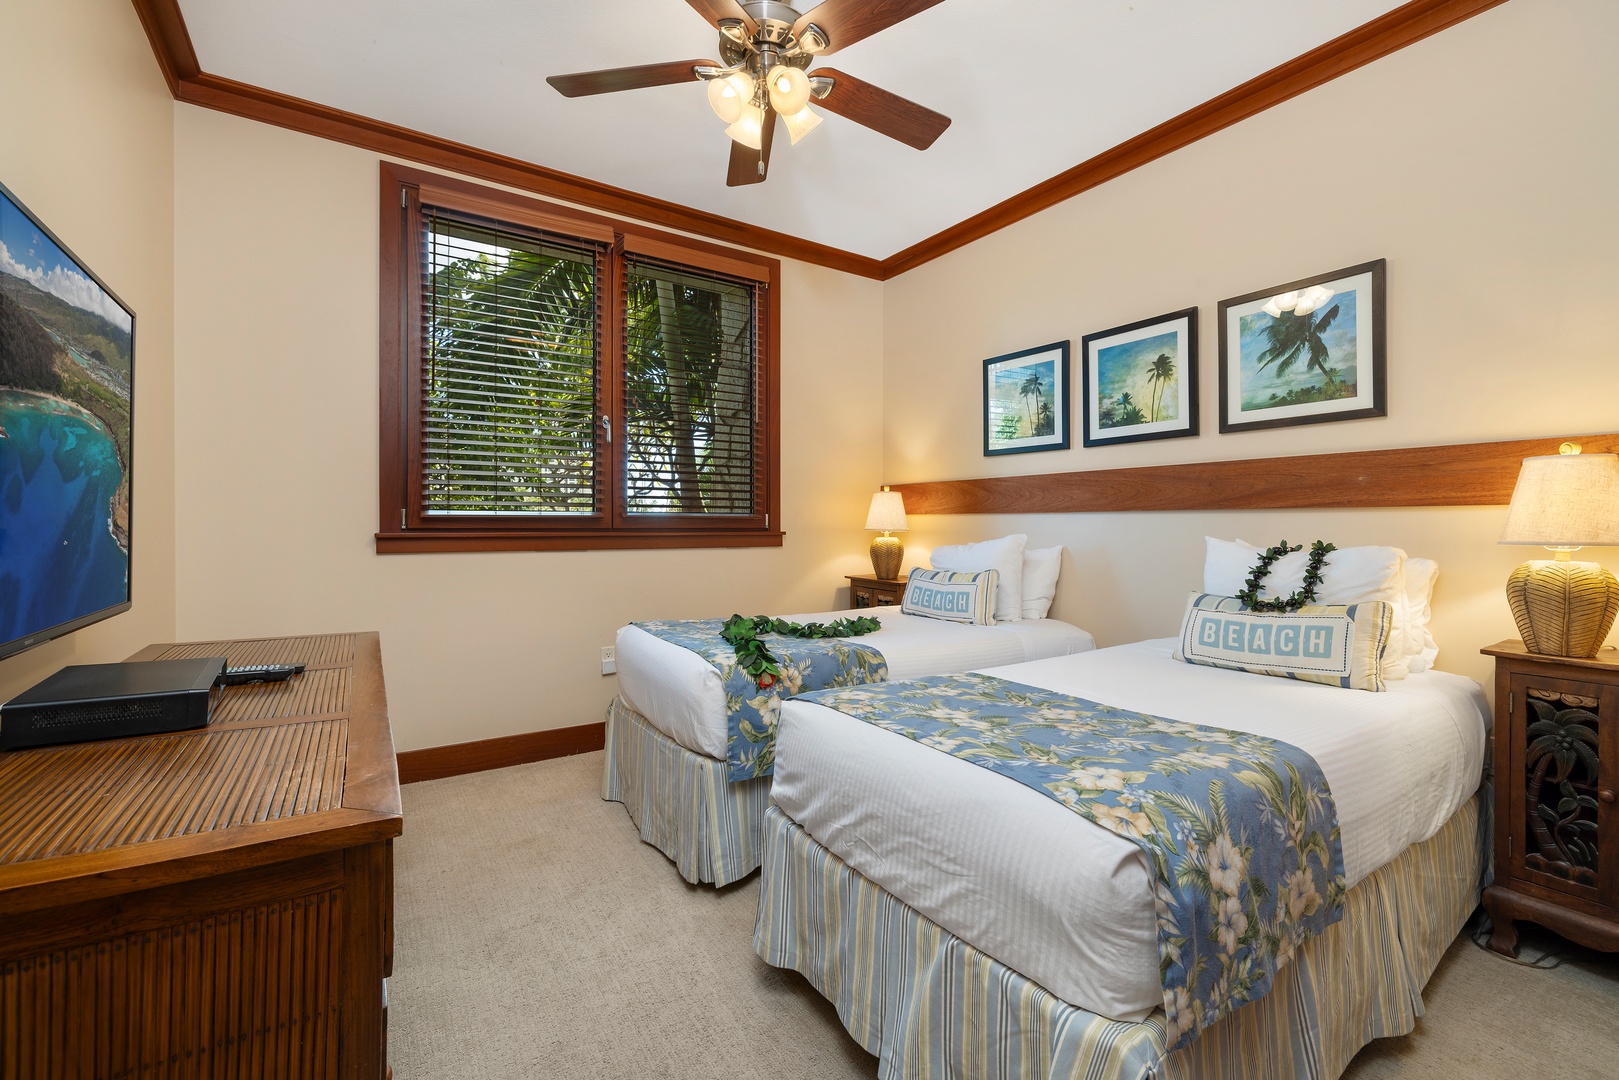 Kapolei Vacation Rentals, Ko Olina Beach Villas B107 - Cozy third guest bedroom with twin beds, tropical accents and natural light.